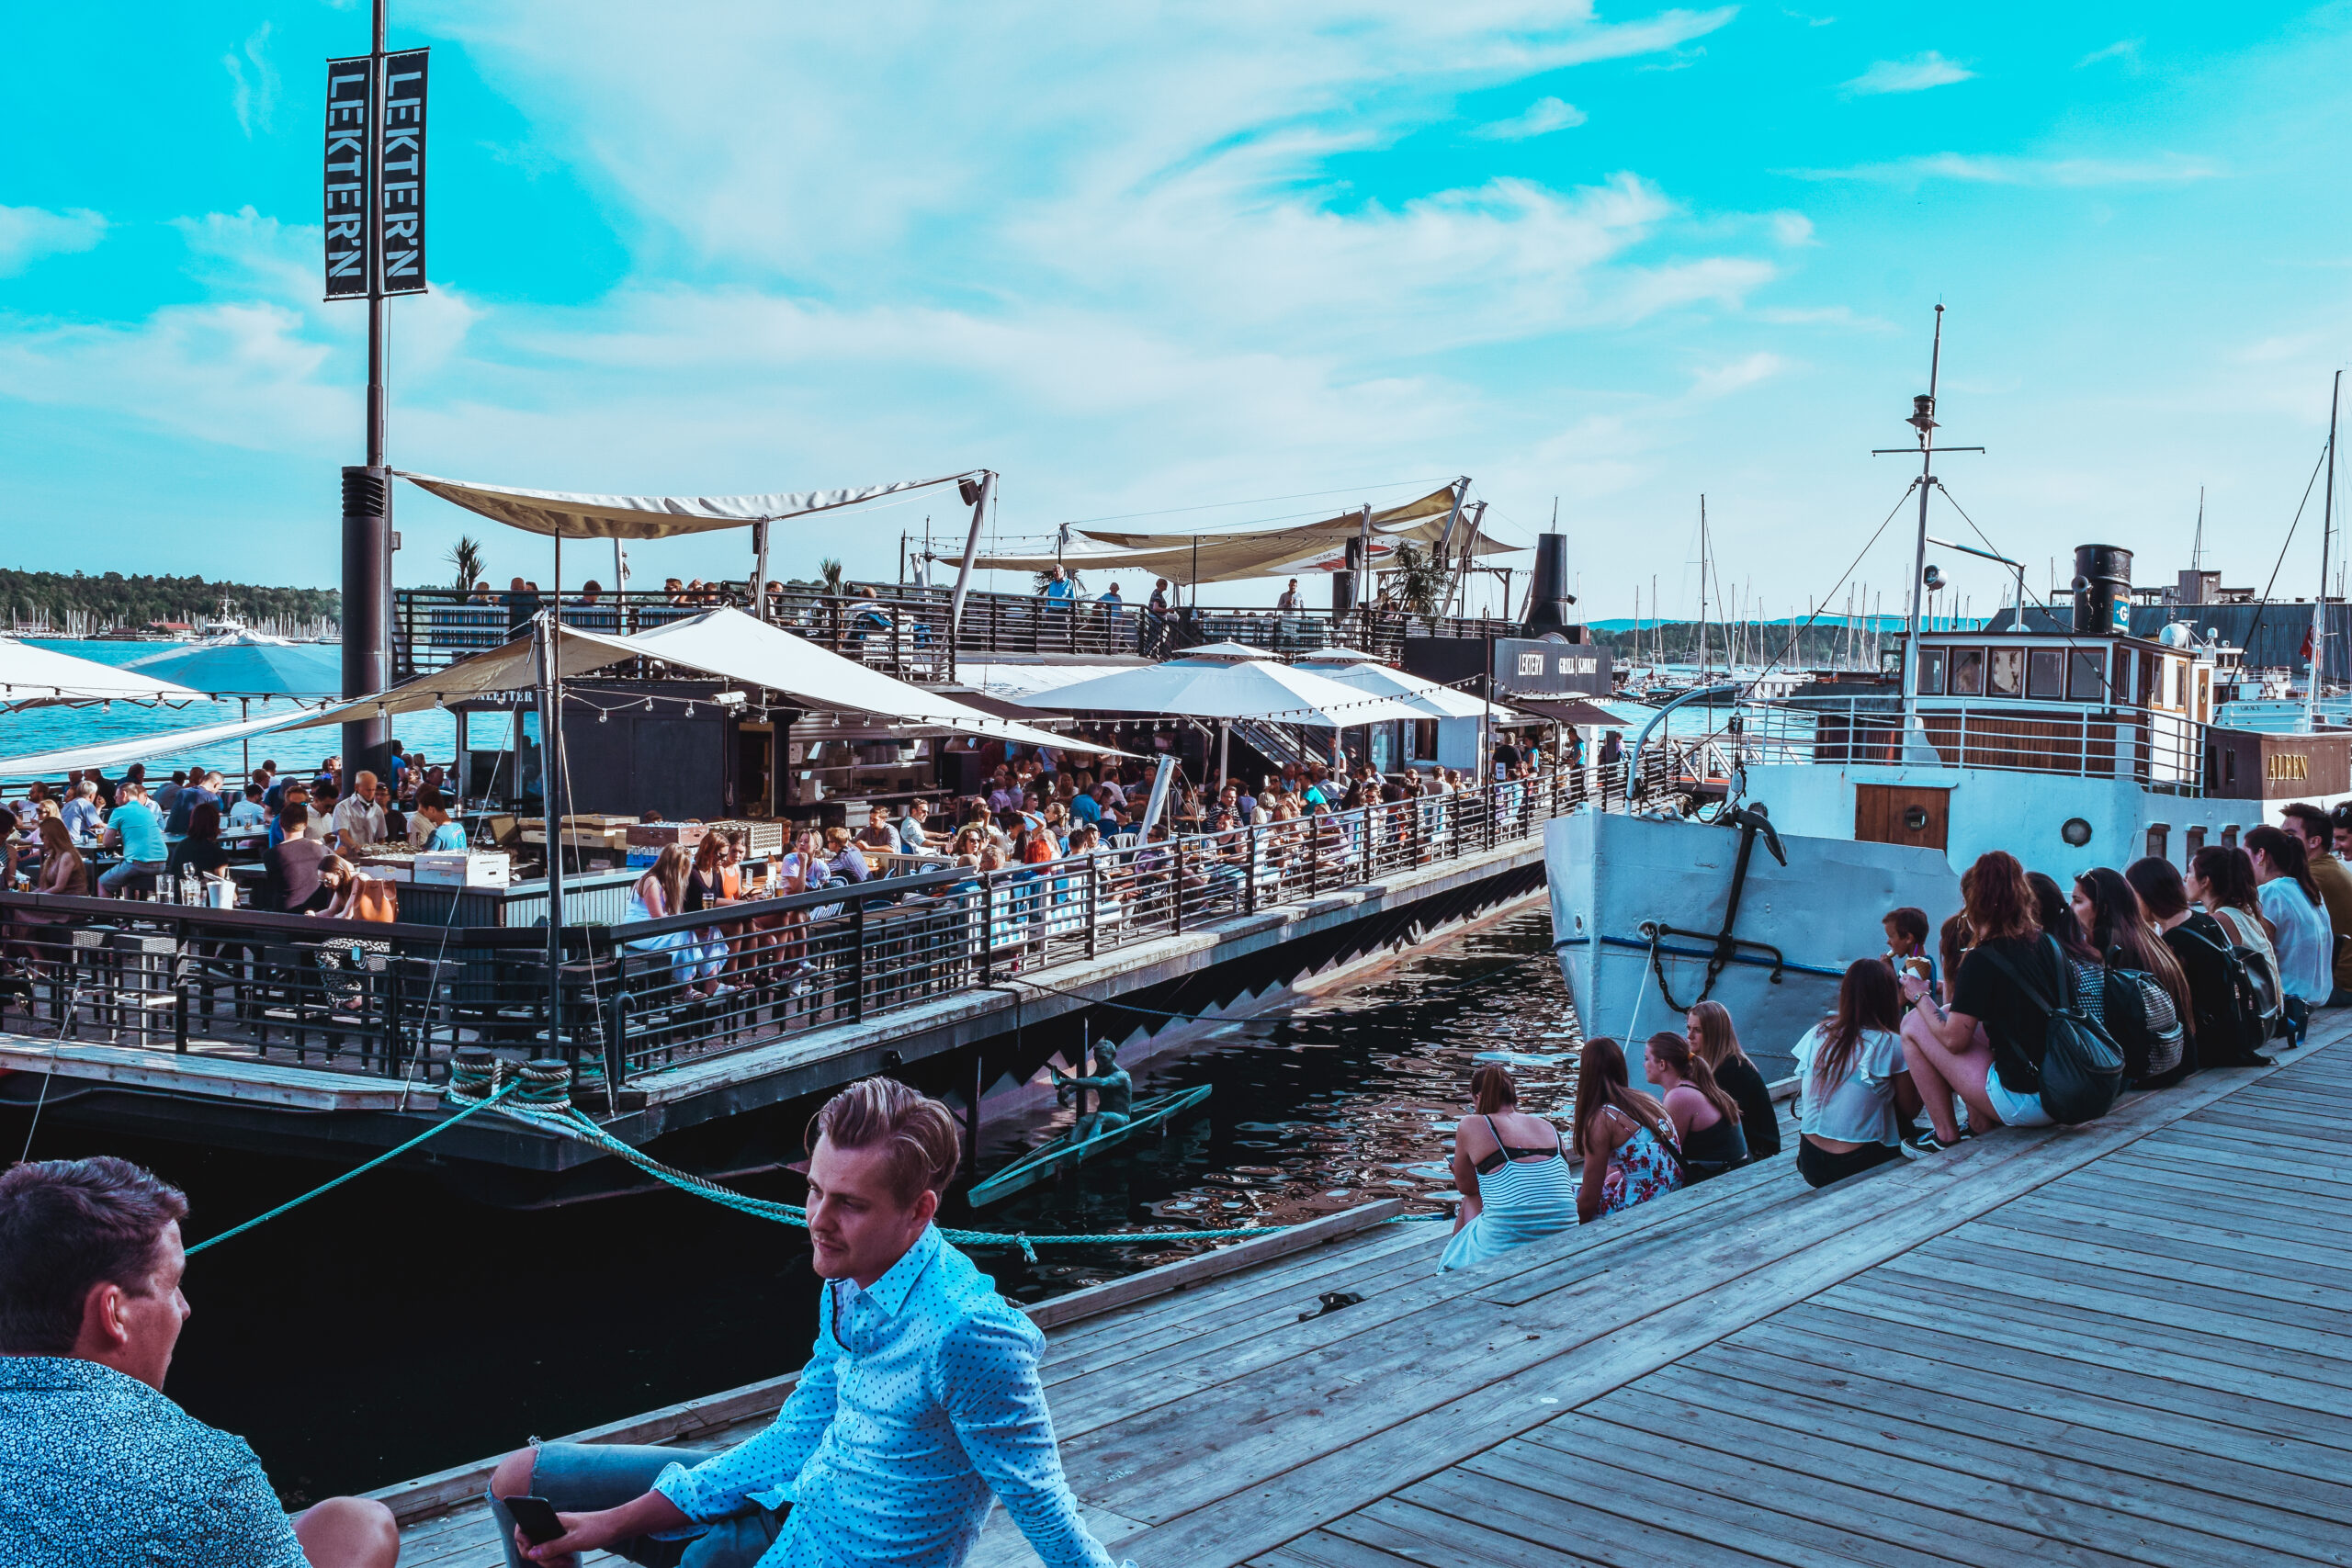 How To Travel In Norway- 24 Hours In Oslo On A Budget travel blog svadore -32 op Things to Do in One Day in Oslo in May Aker Brygge